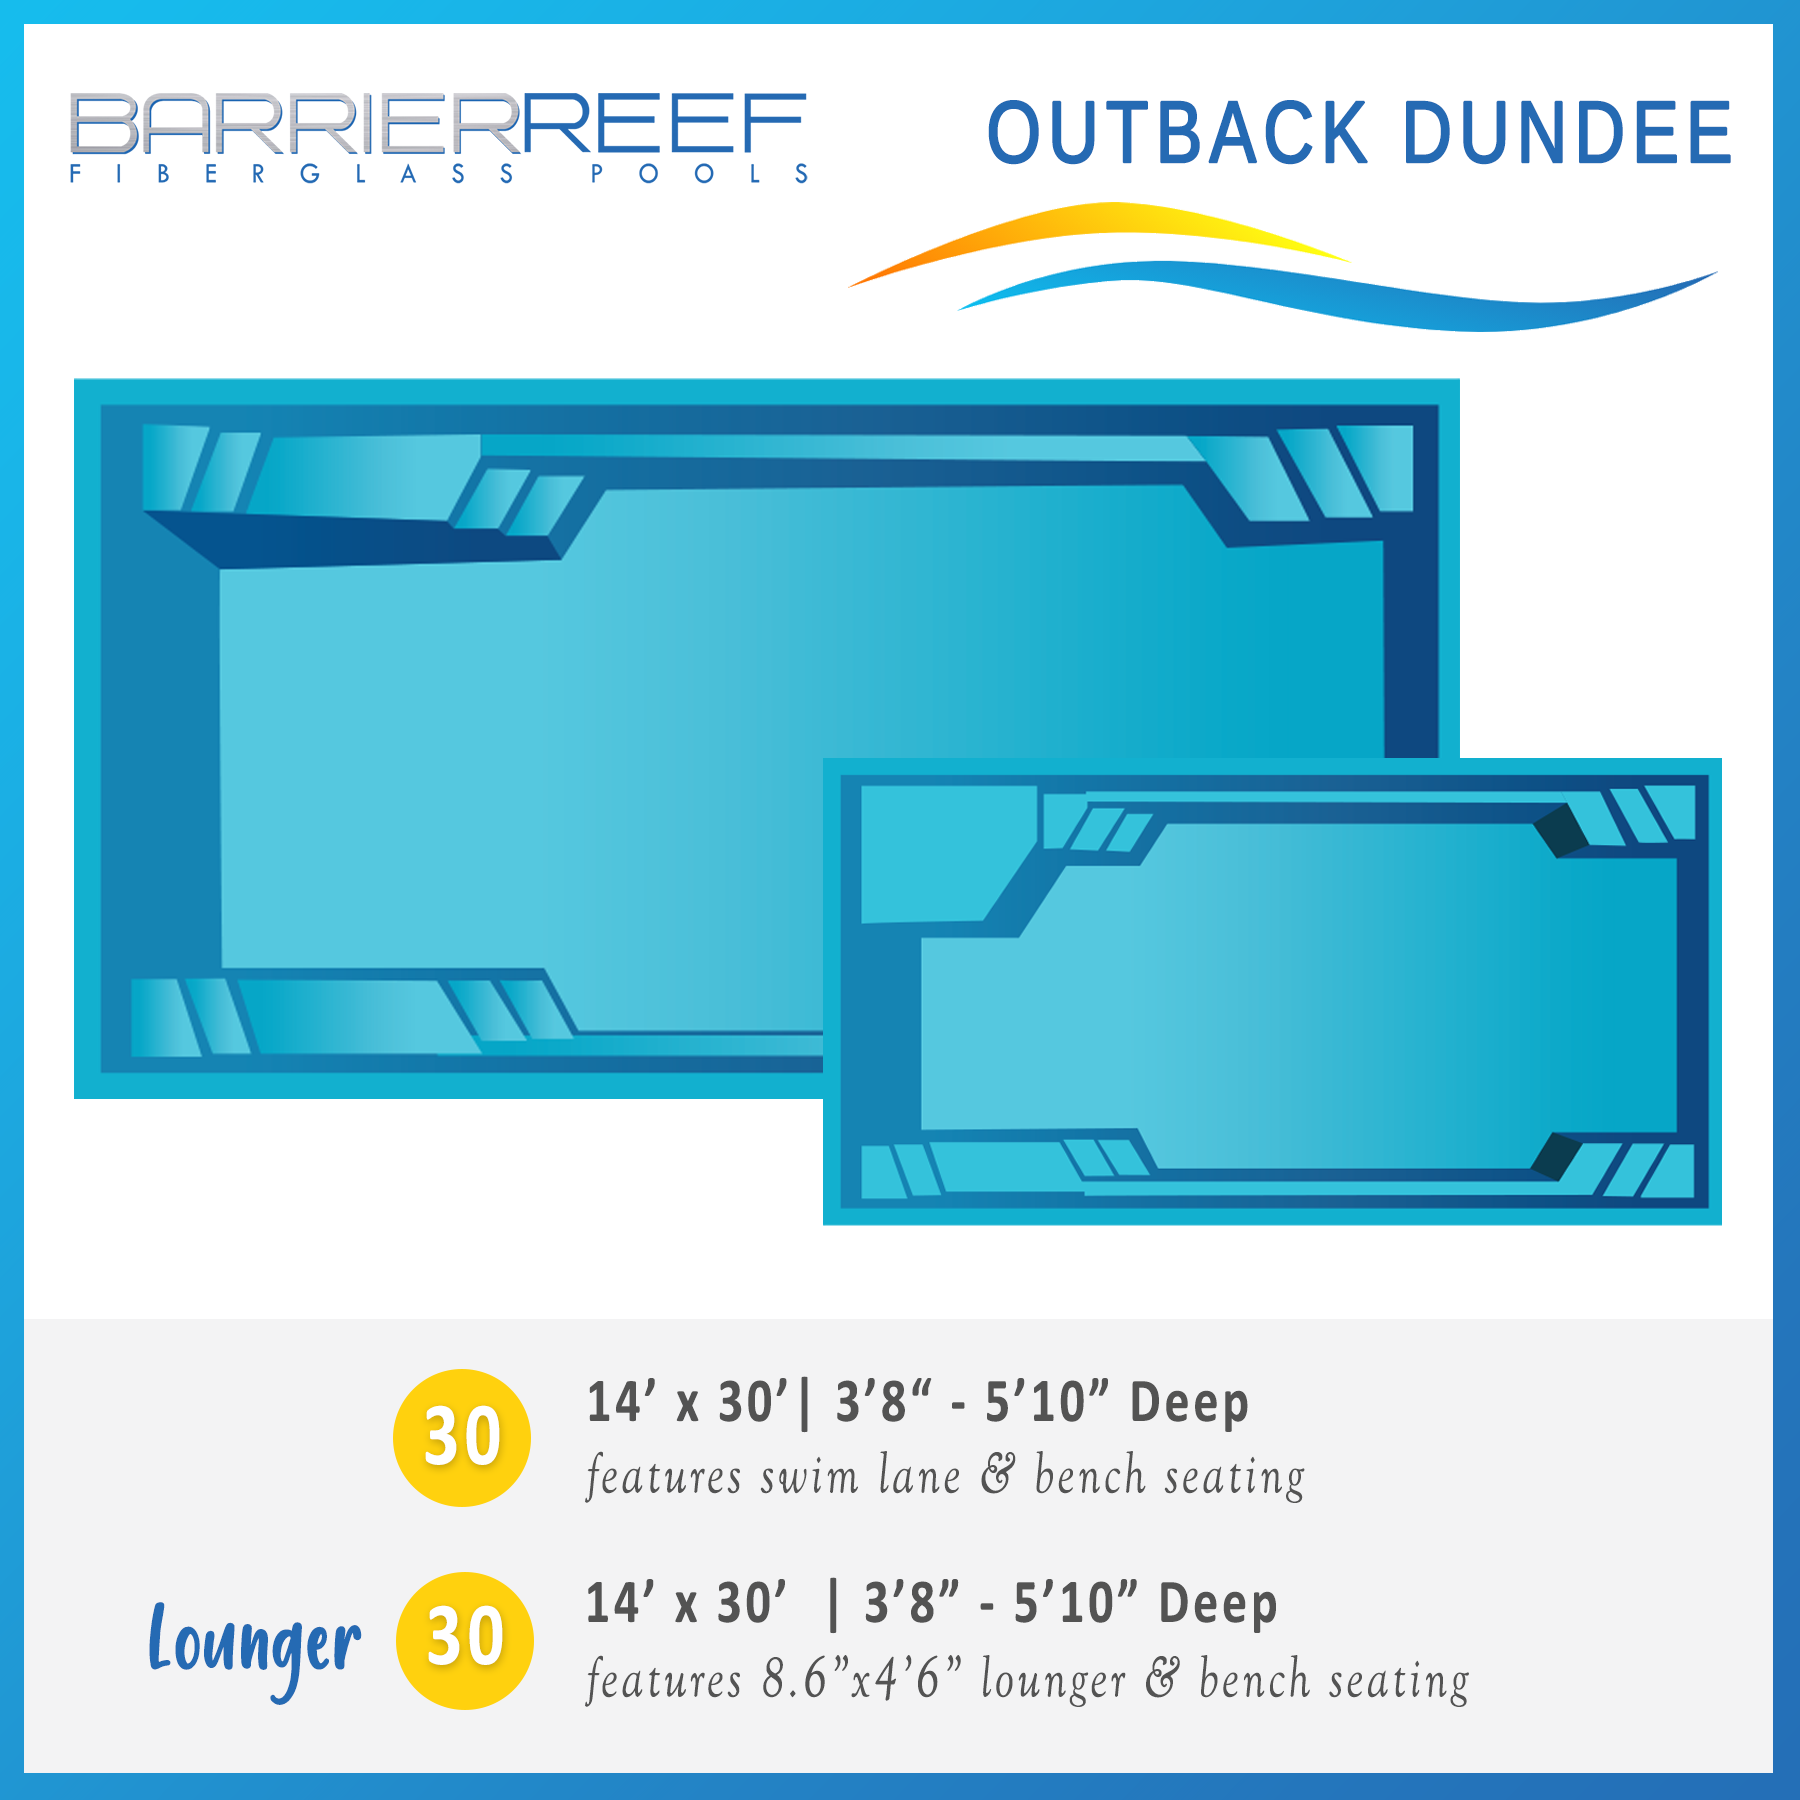 Outback Dundee Barrier Reef Fiberglass Pool